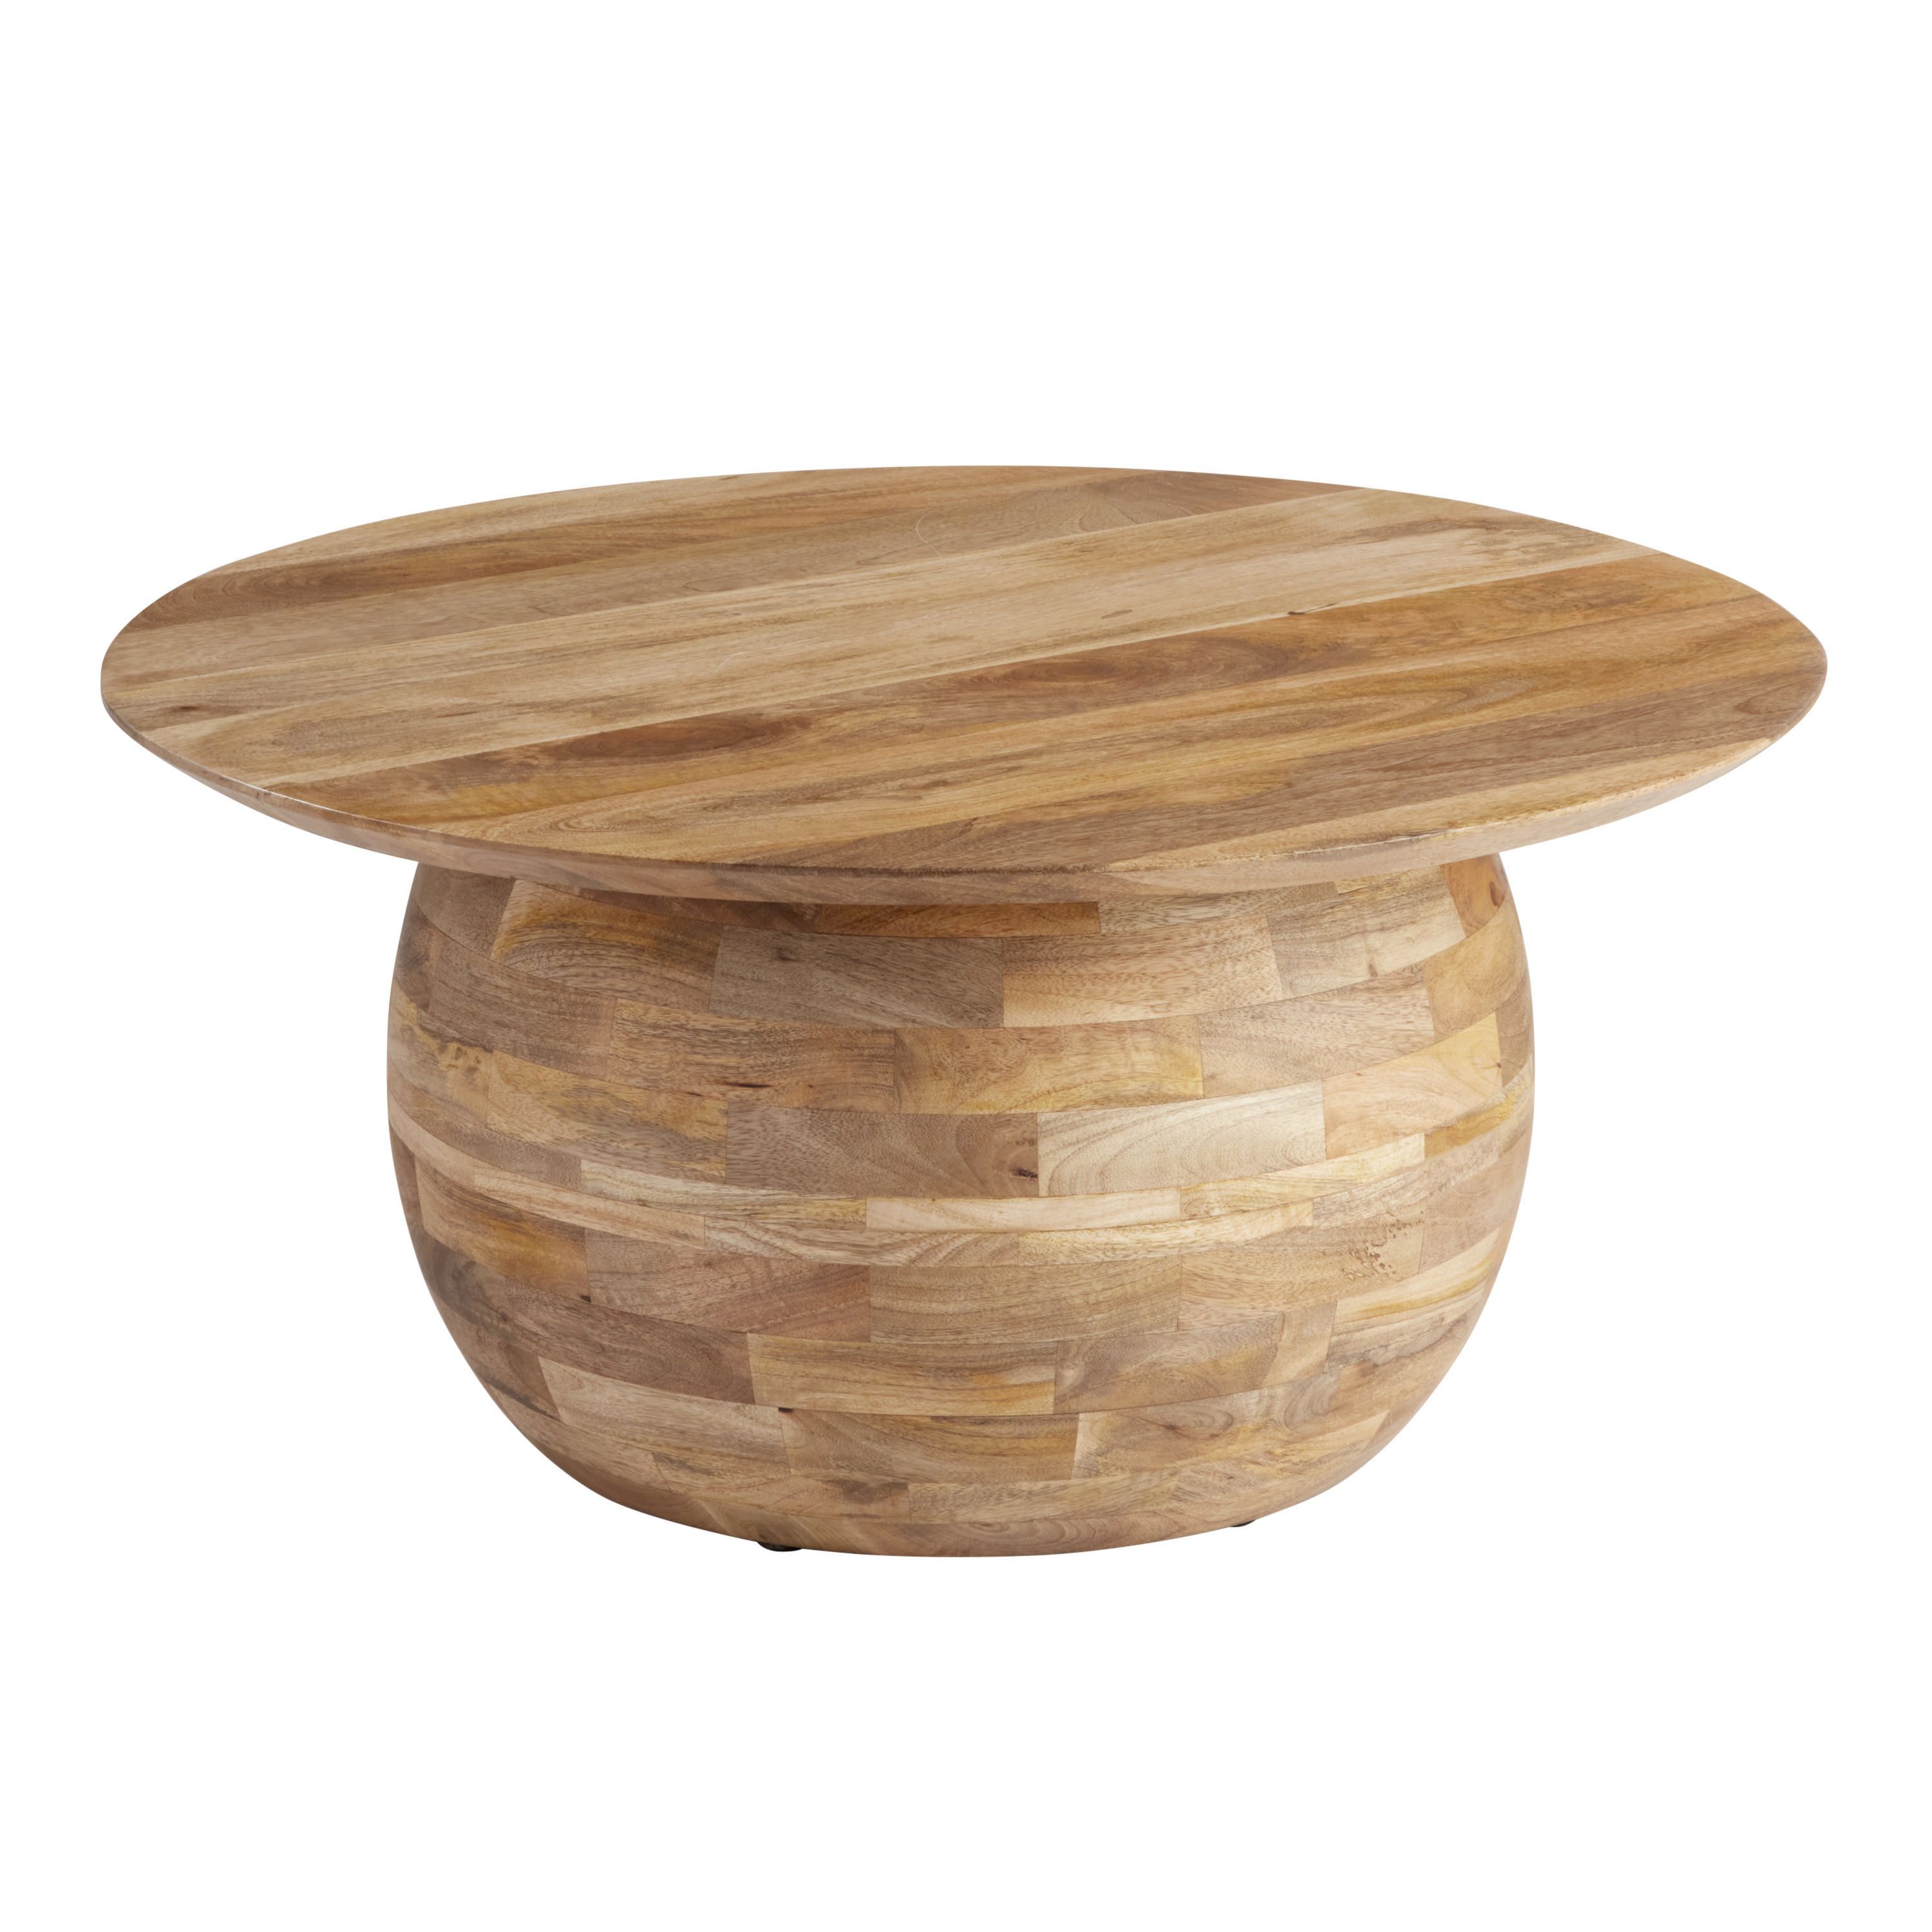 Gregor Round Driftwood Wood Ball Coffee Table | World Market